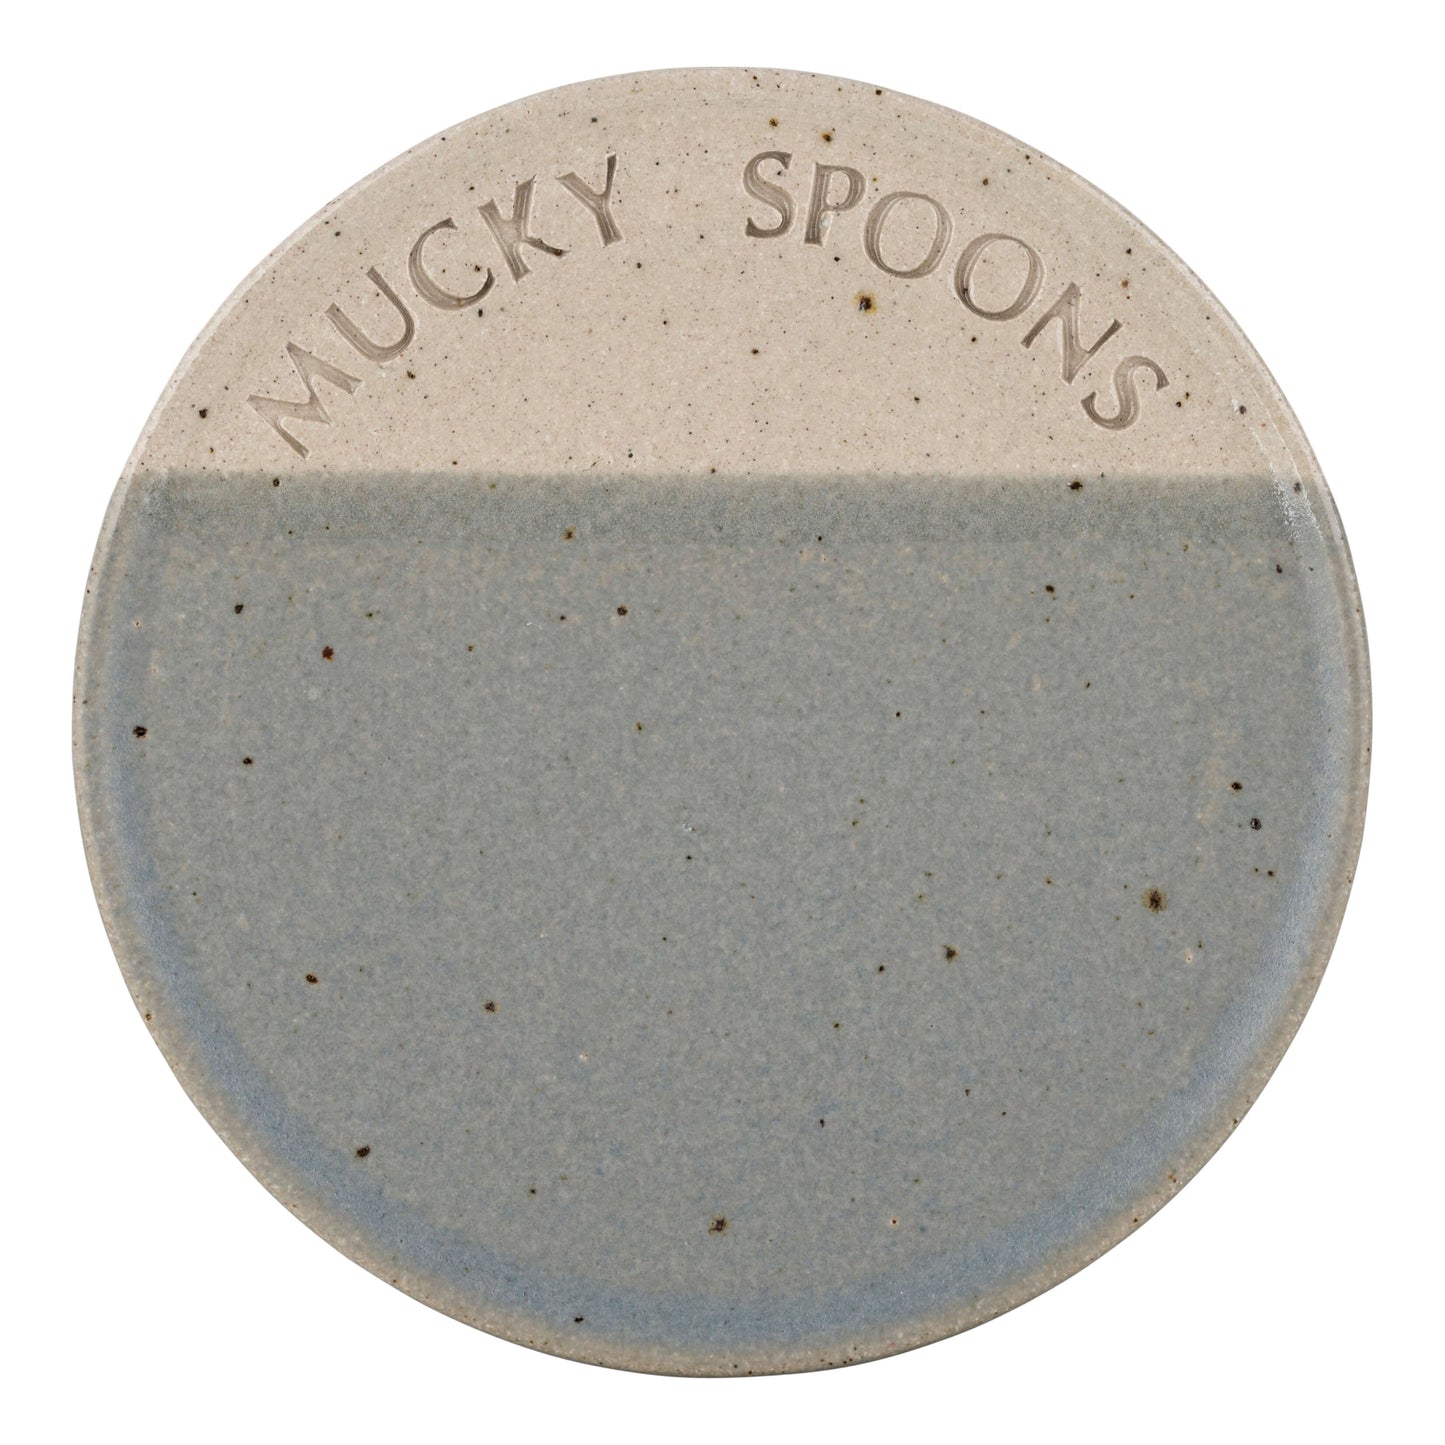 The Village Pottery Mucky Spoon Rest (6 colour options)